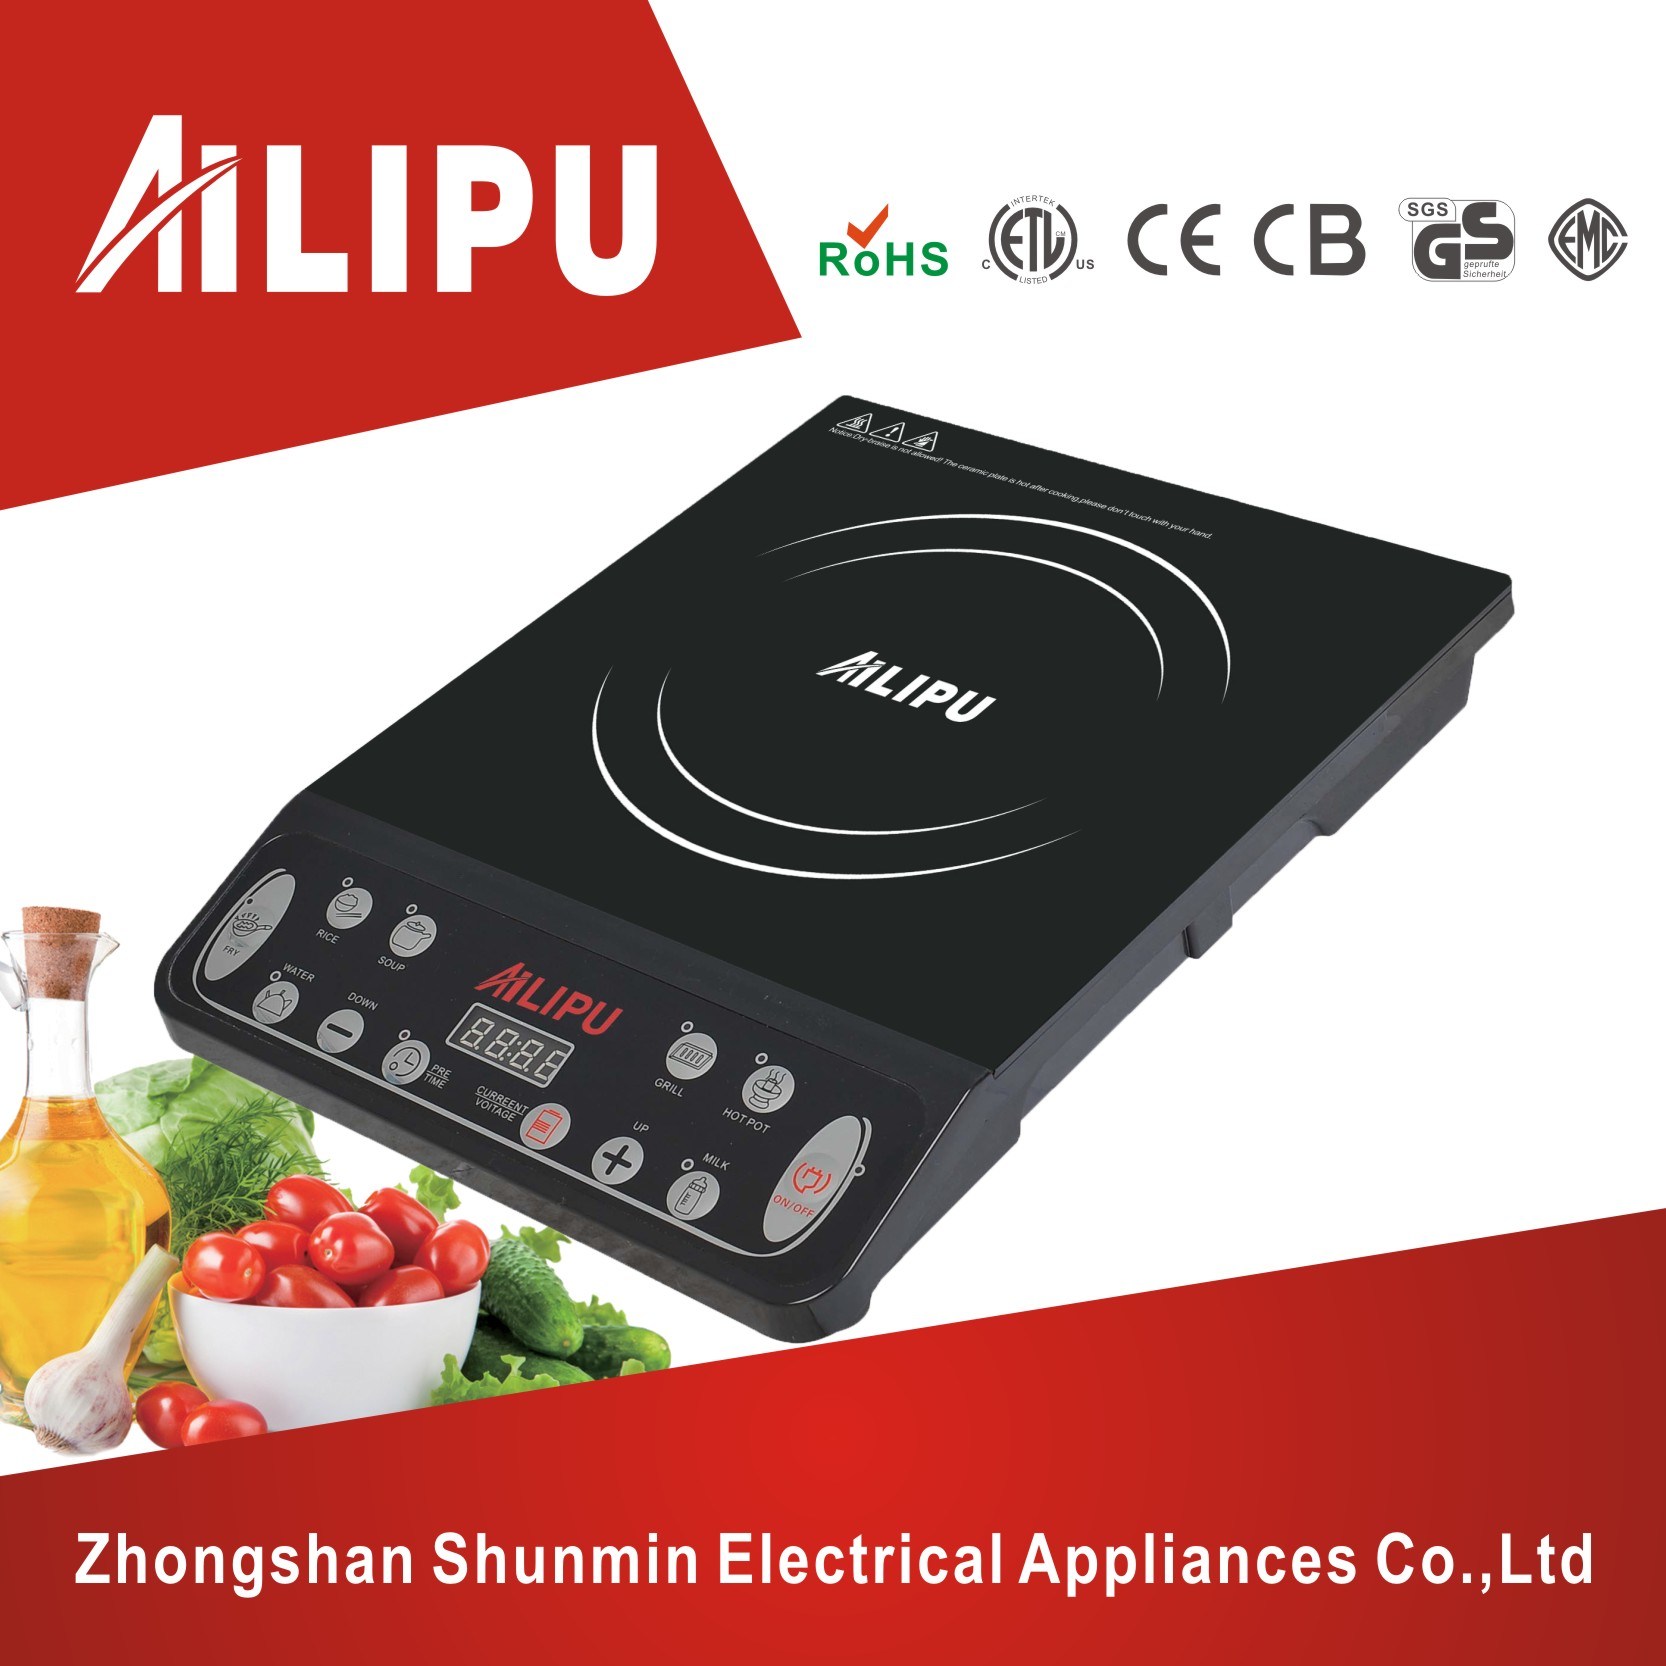 Key Control Intelligent Cooking Top/Single Flame Cooktop/Electric Induction Cooker/Stove/Hob